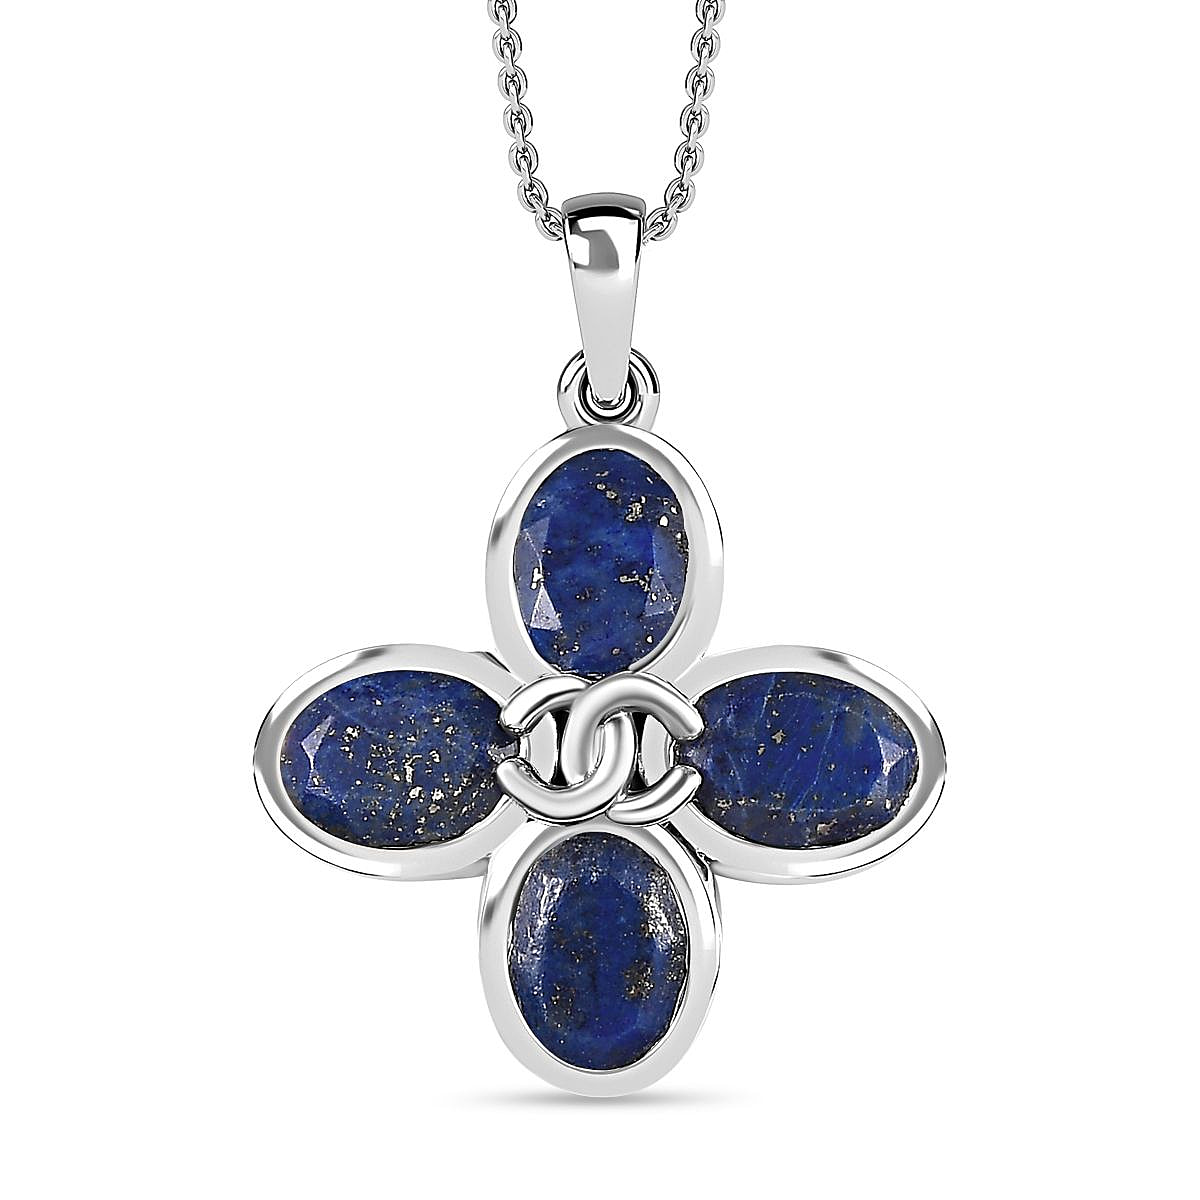 Lapis Lazuli Floral Pendant with Chain (Size 20) in Platinum Overlay Sterling Silver 5.20 Ct, Silver Wt. 6.4 Gms